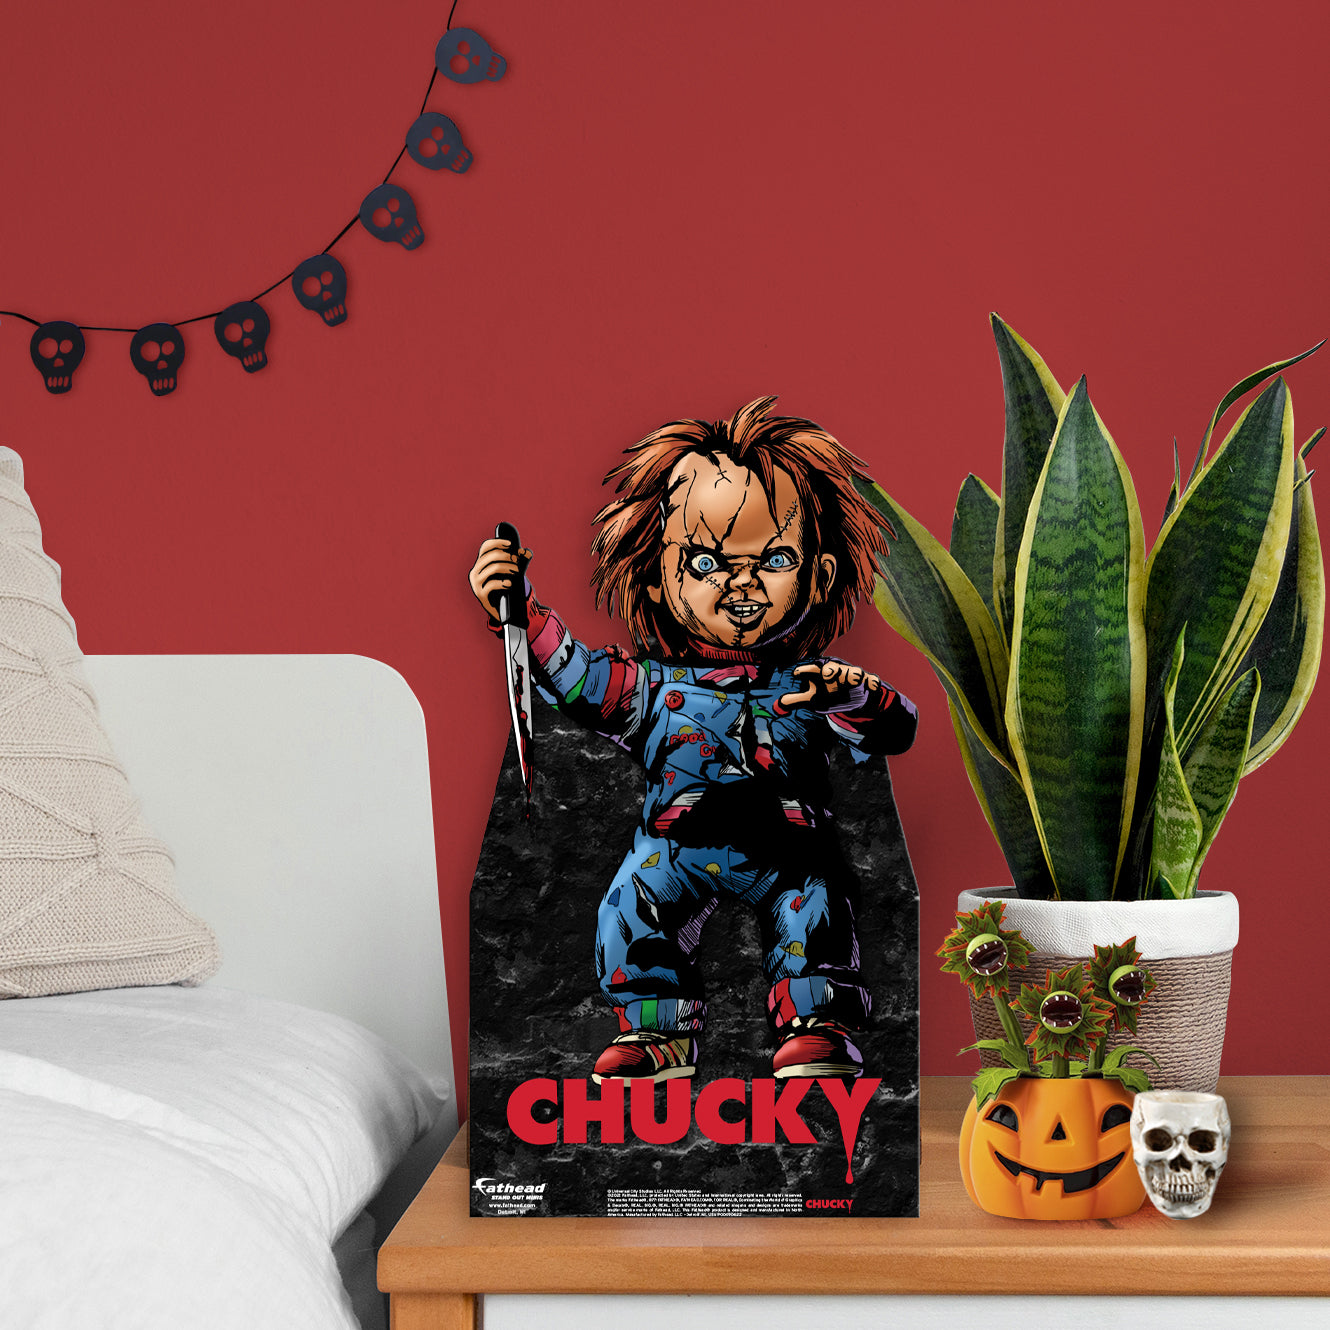 Chucky: Chucky Scarred  Mini   Cardstock Cutout  - Officially Licensed NBC Universal    Stand Out